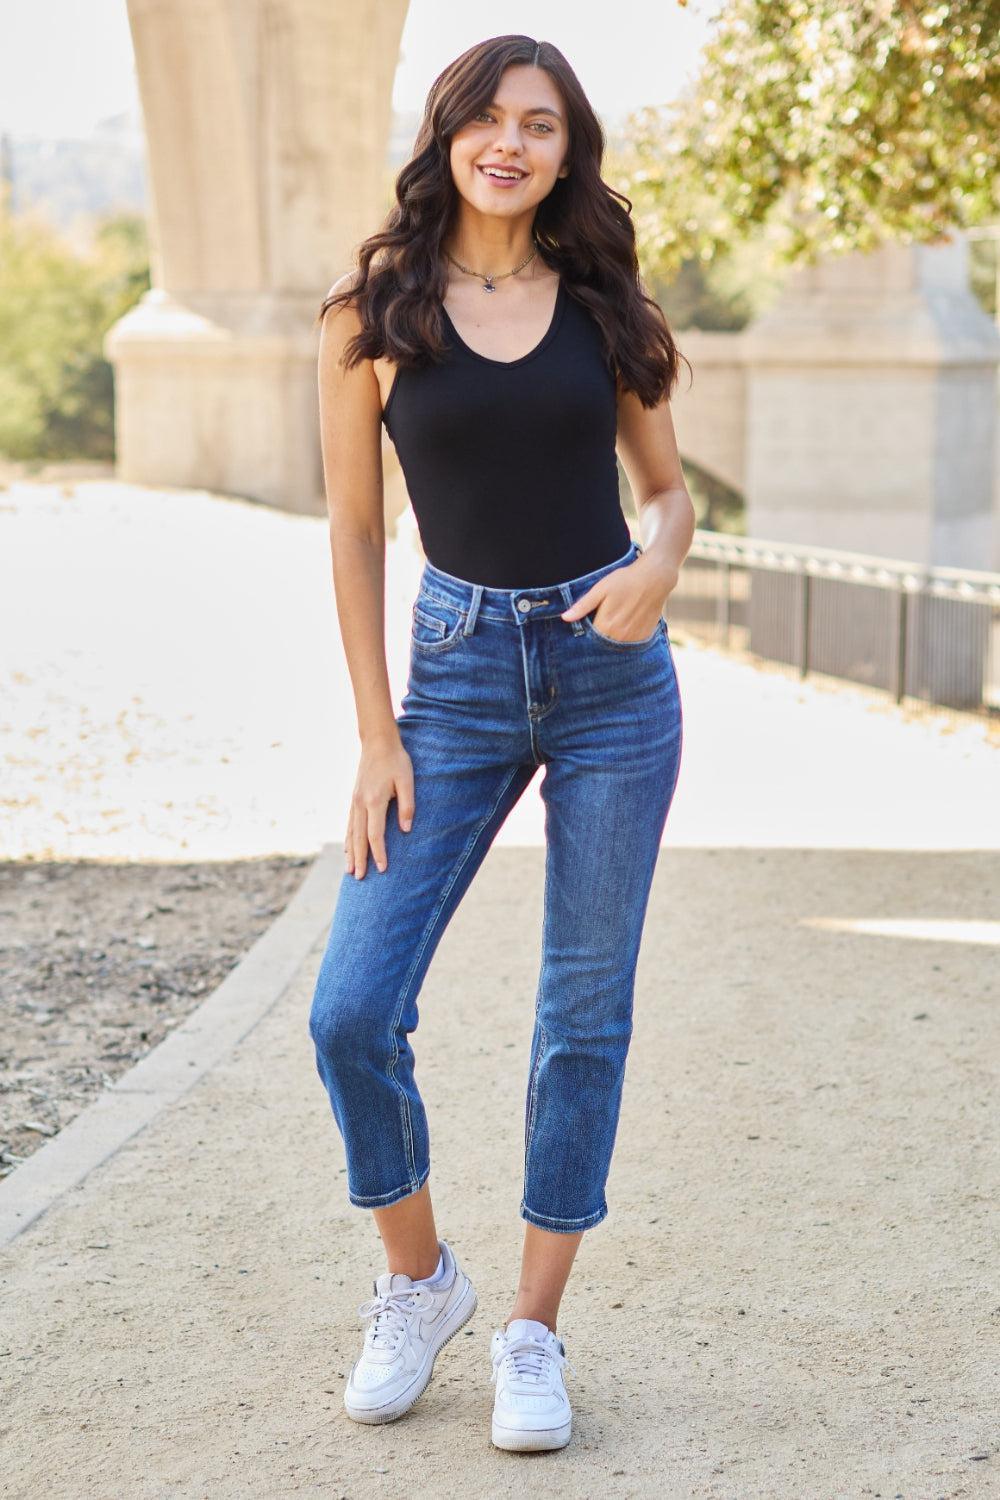 a woman in black shirt and jeans posing for a picture